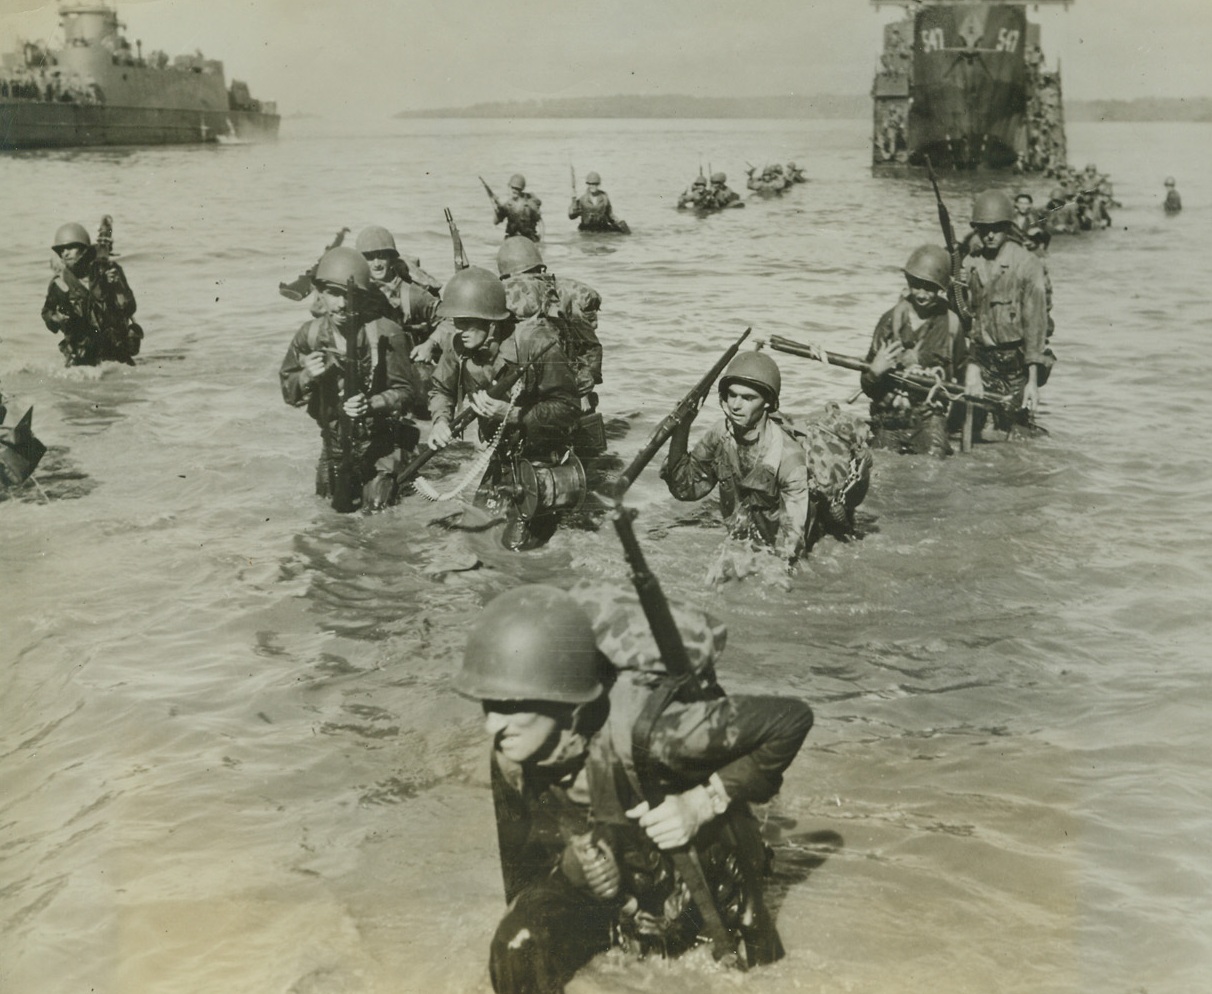 Yank Infantry Invades Morotai Island, 9/20/1944. Morotai Island – With “necklaces” of hand grenades and rifles, these Yank infantrymen swarm ashore in neck-deep water from their LCI’s to Morotai Island Beach, just South of the Philippines.  Credit line (ACME);